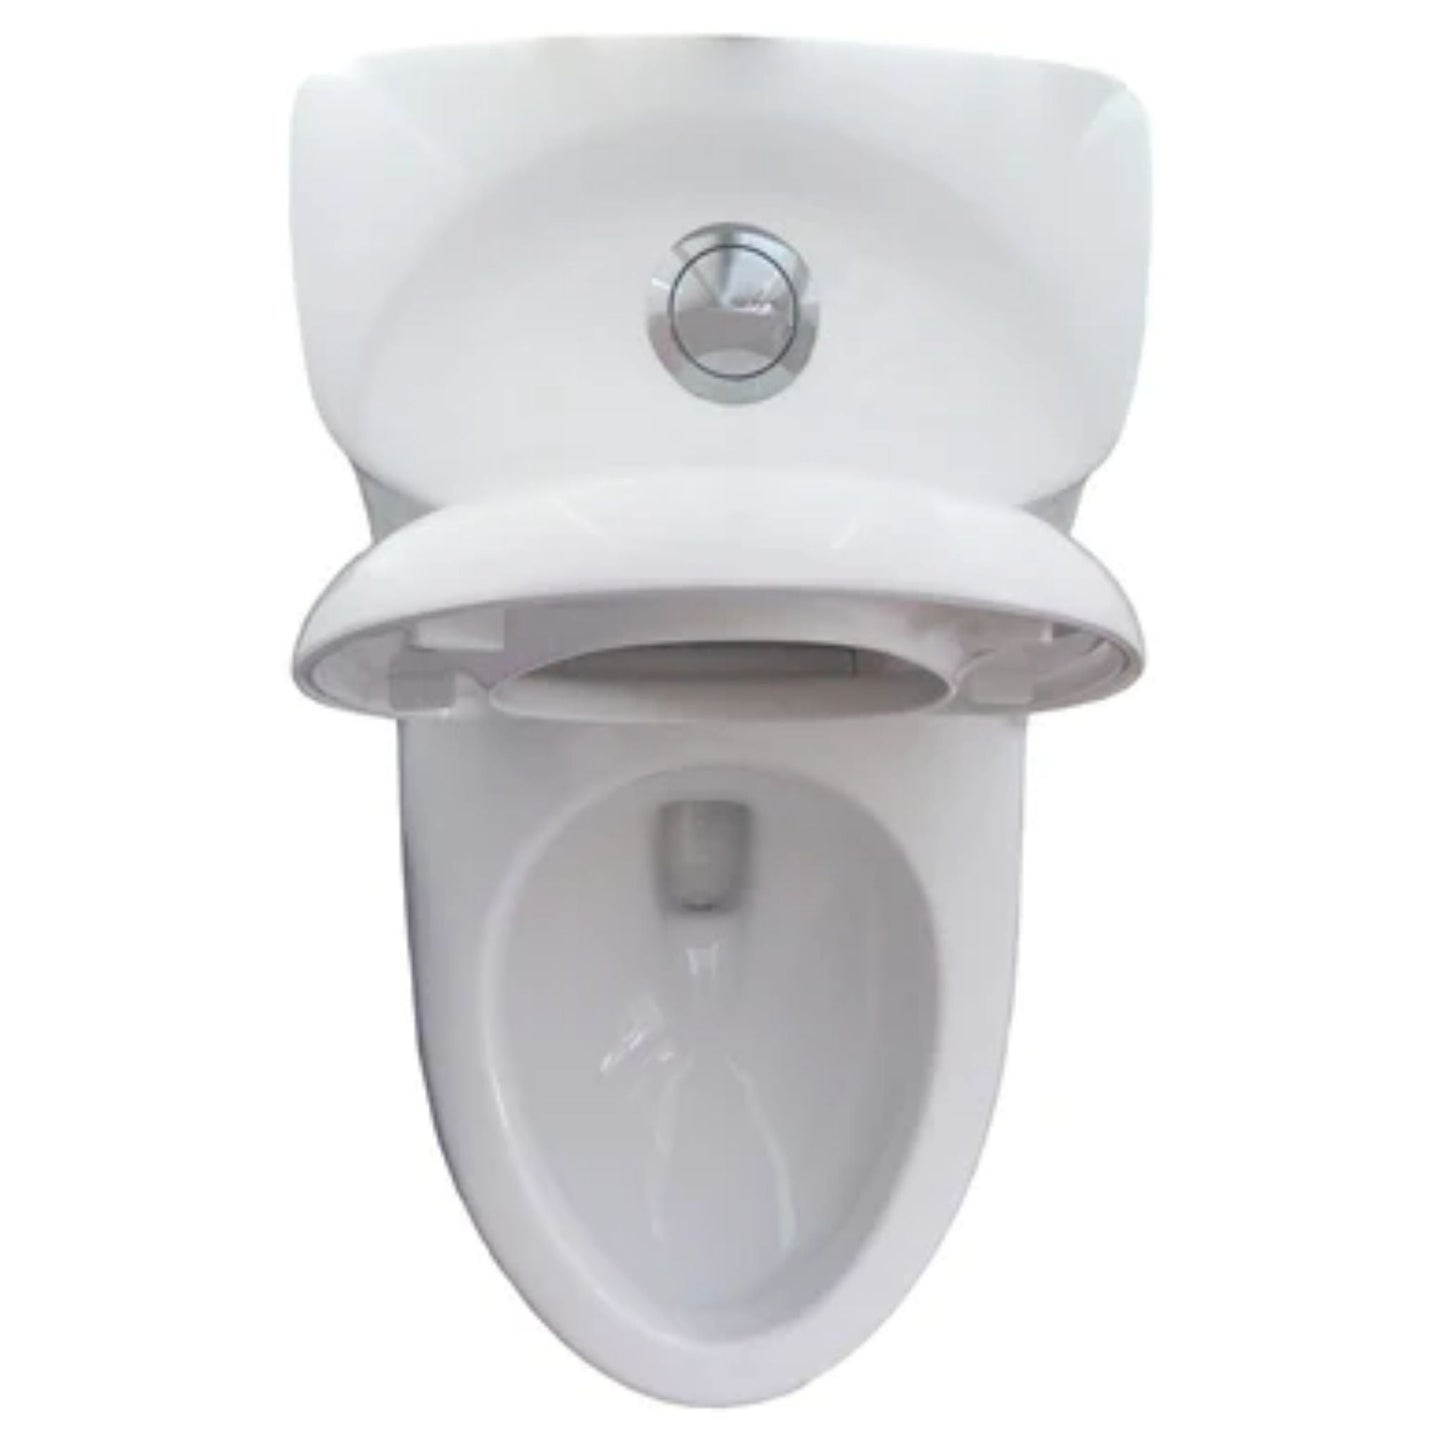 LessCare One Piece Elegant Modern Toilet with Soft Close Seat